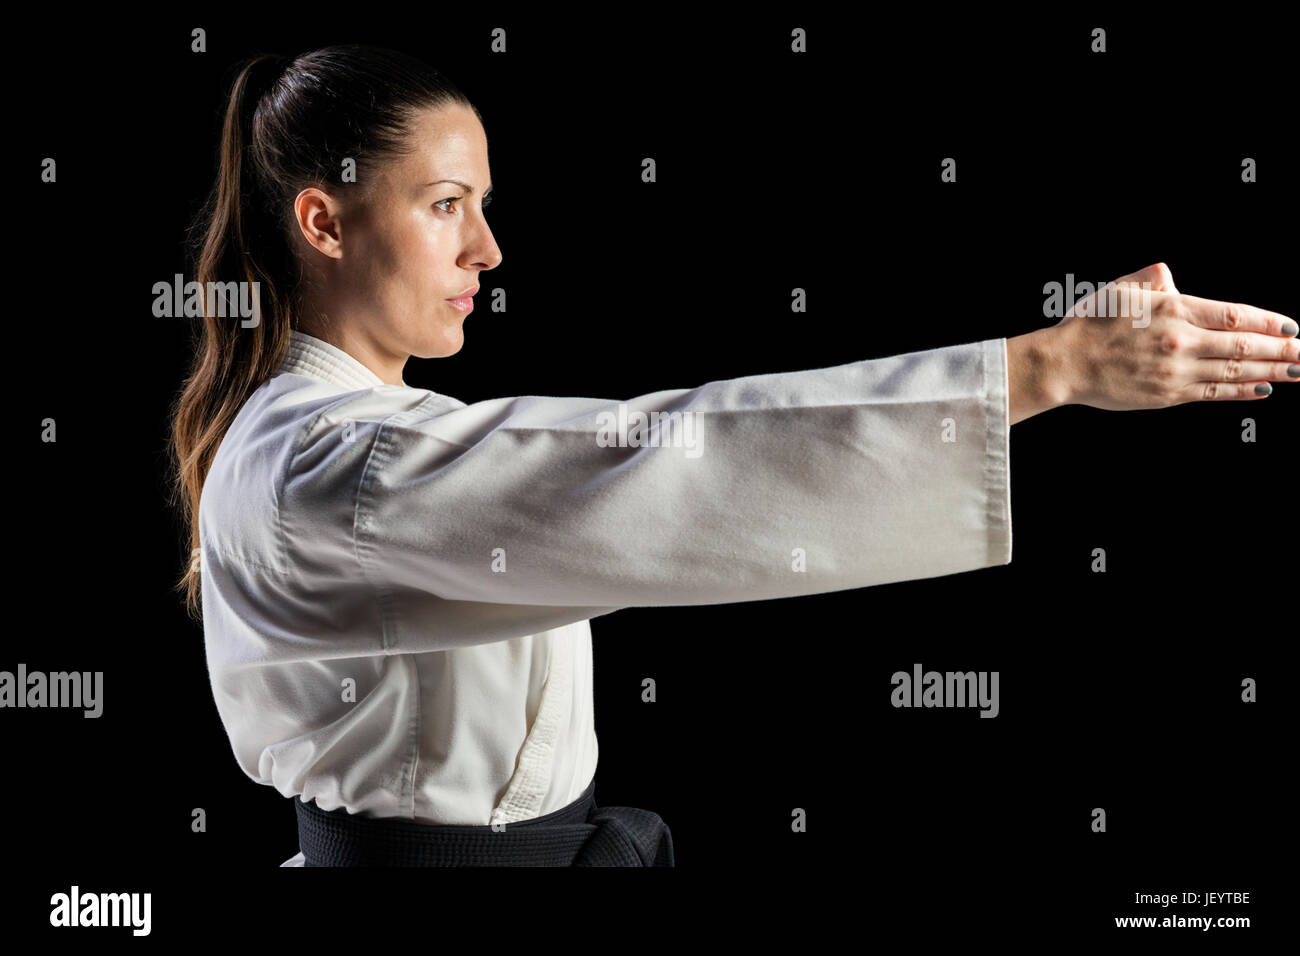 Female fighter performing karate stance Stock Photo - Alamy